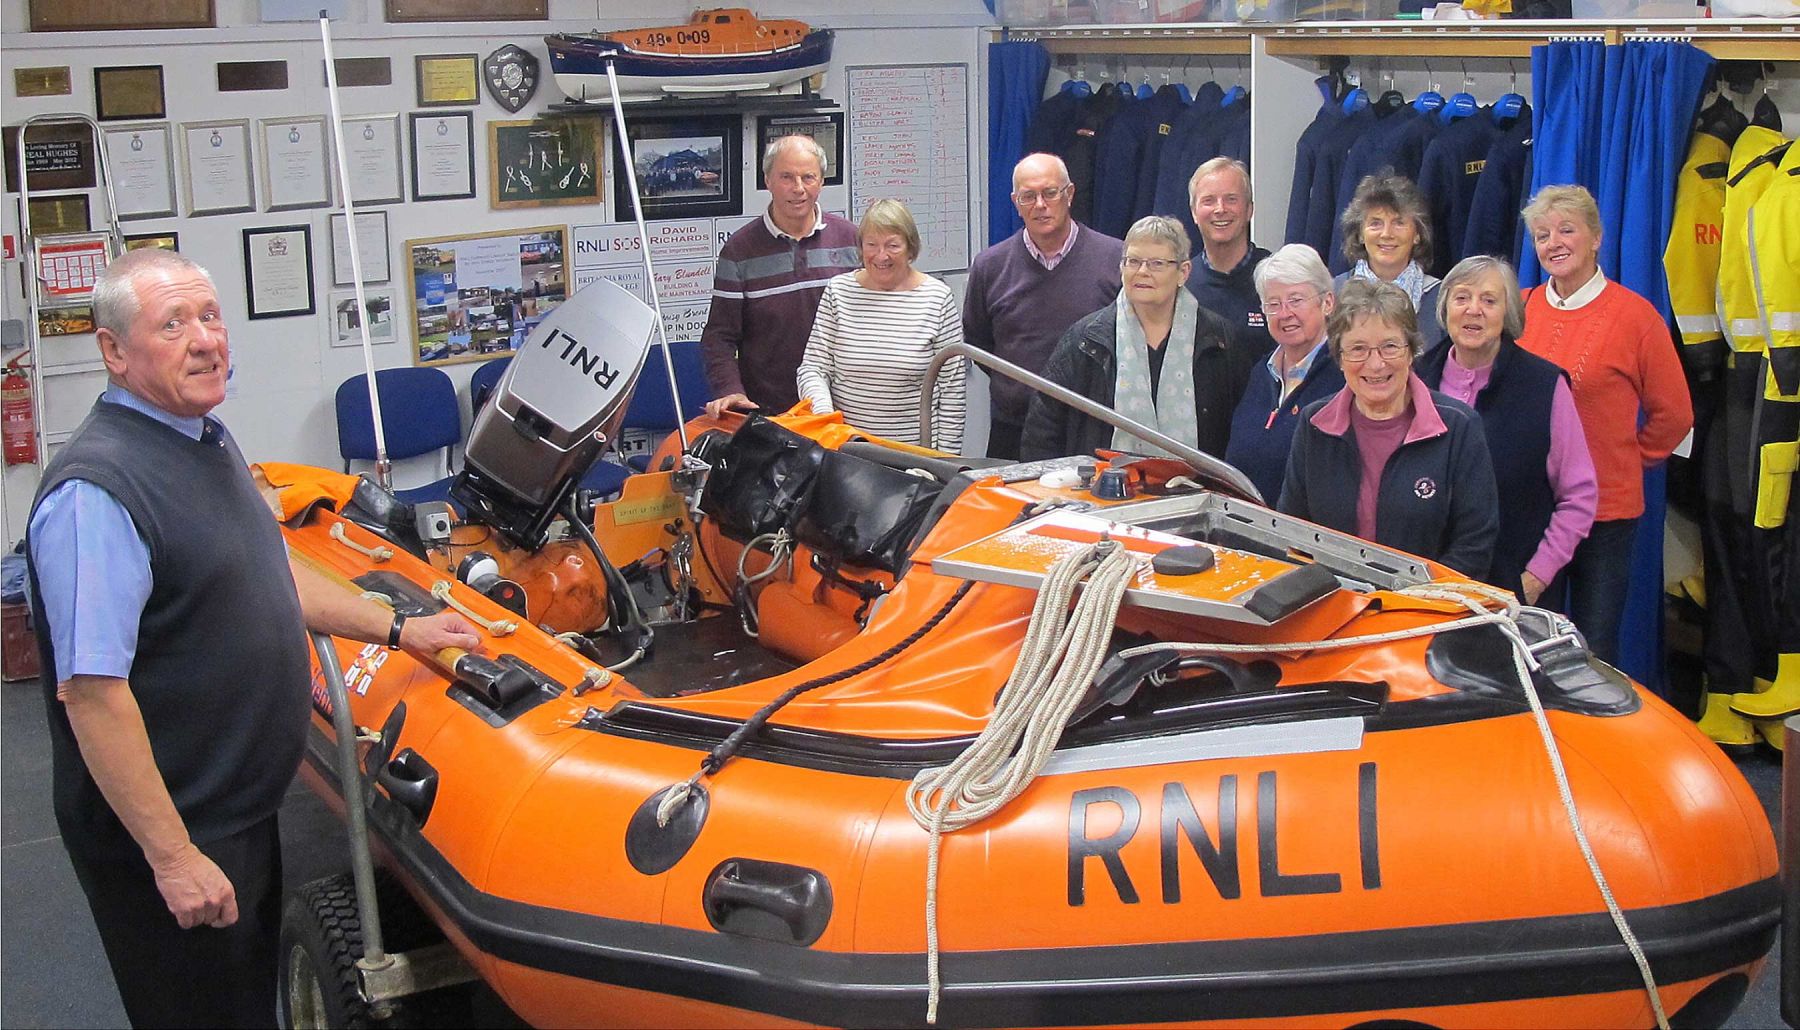 Rob Clements teaching the new Visitor Centre volunteers at the lifeboat station